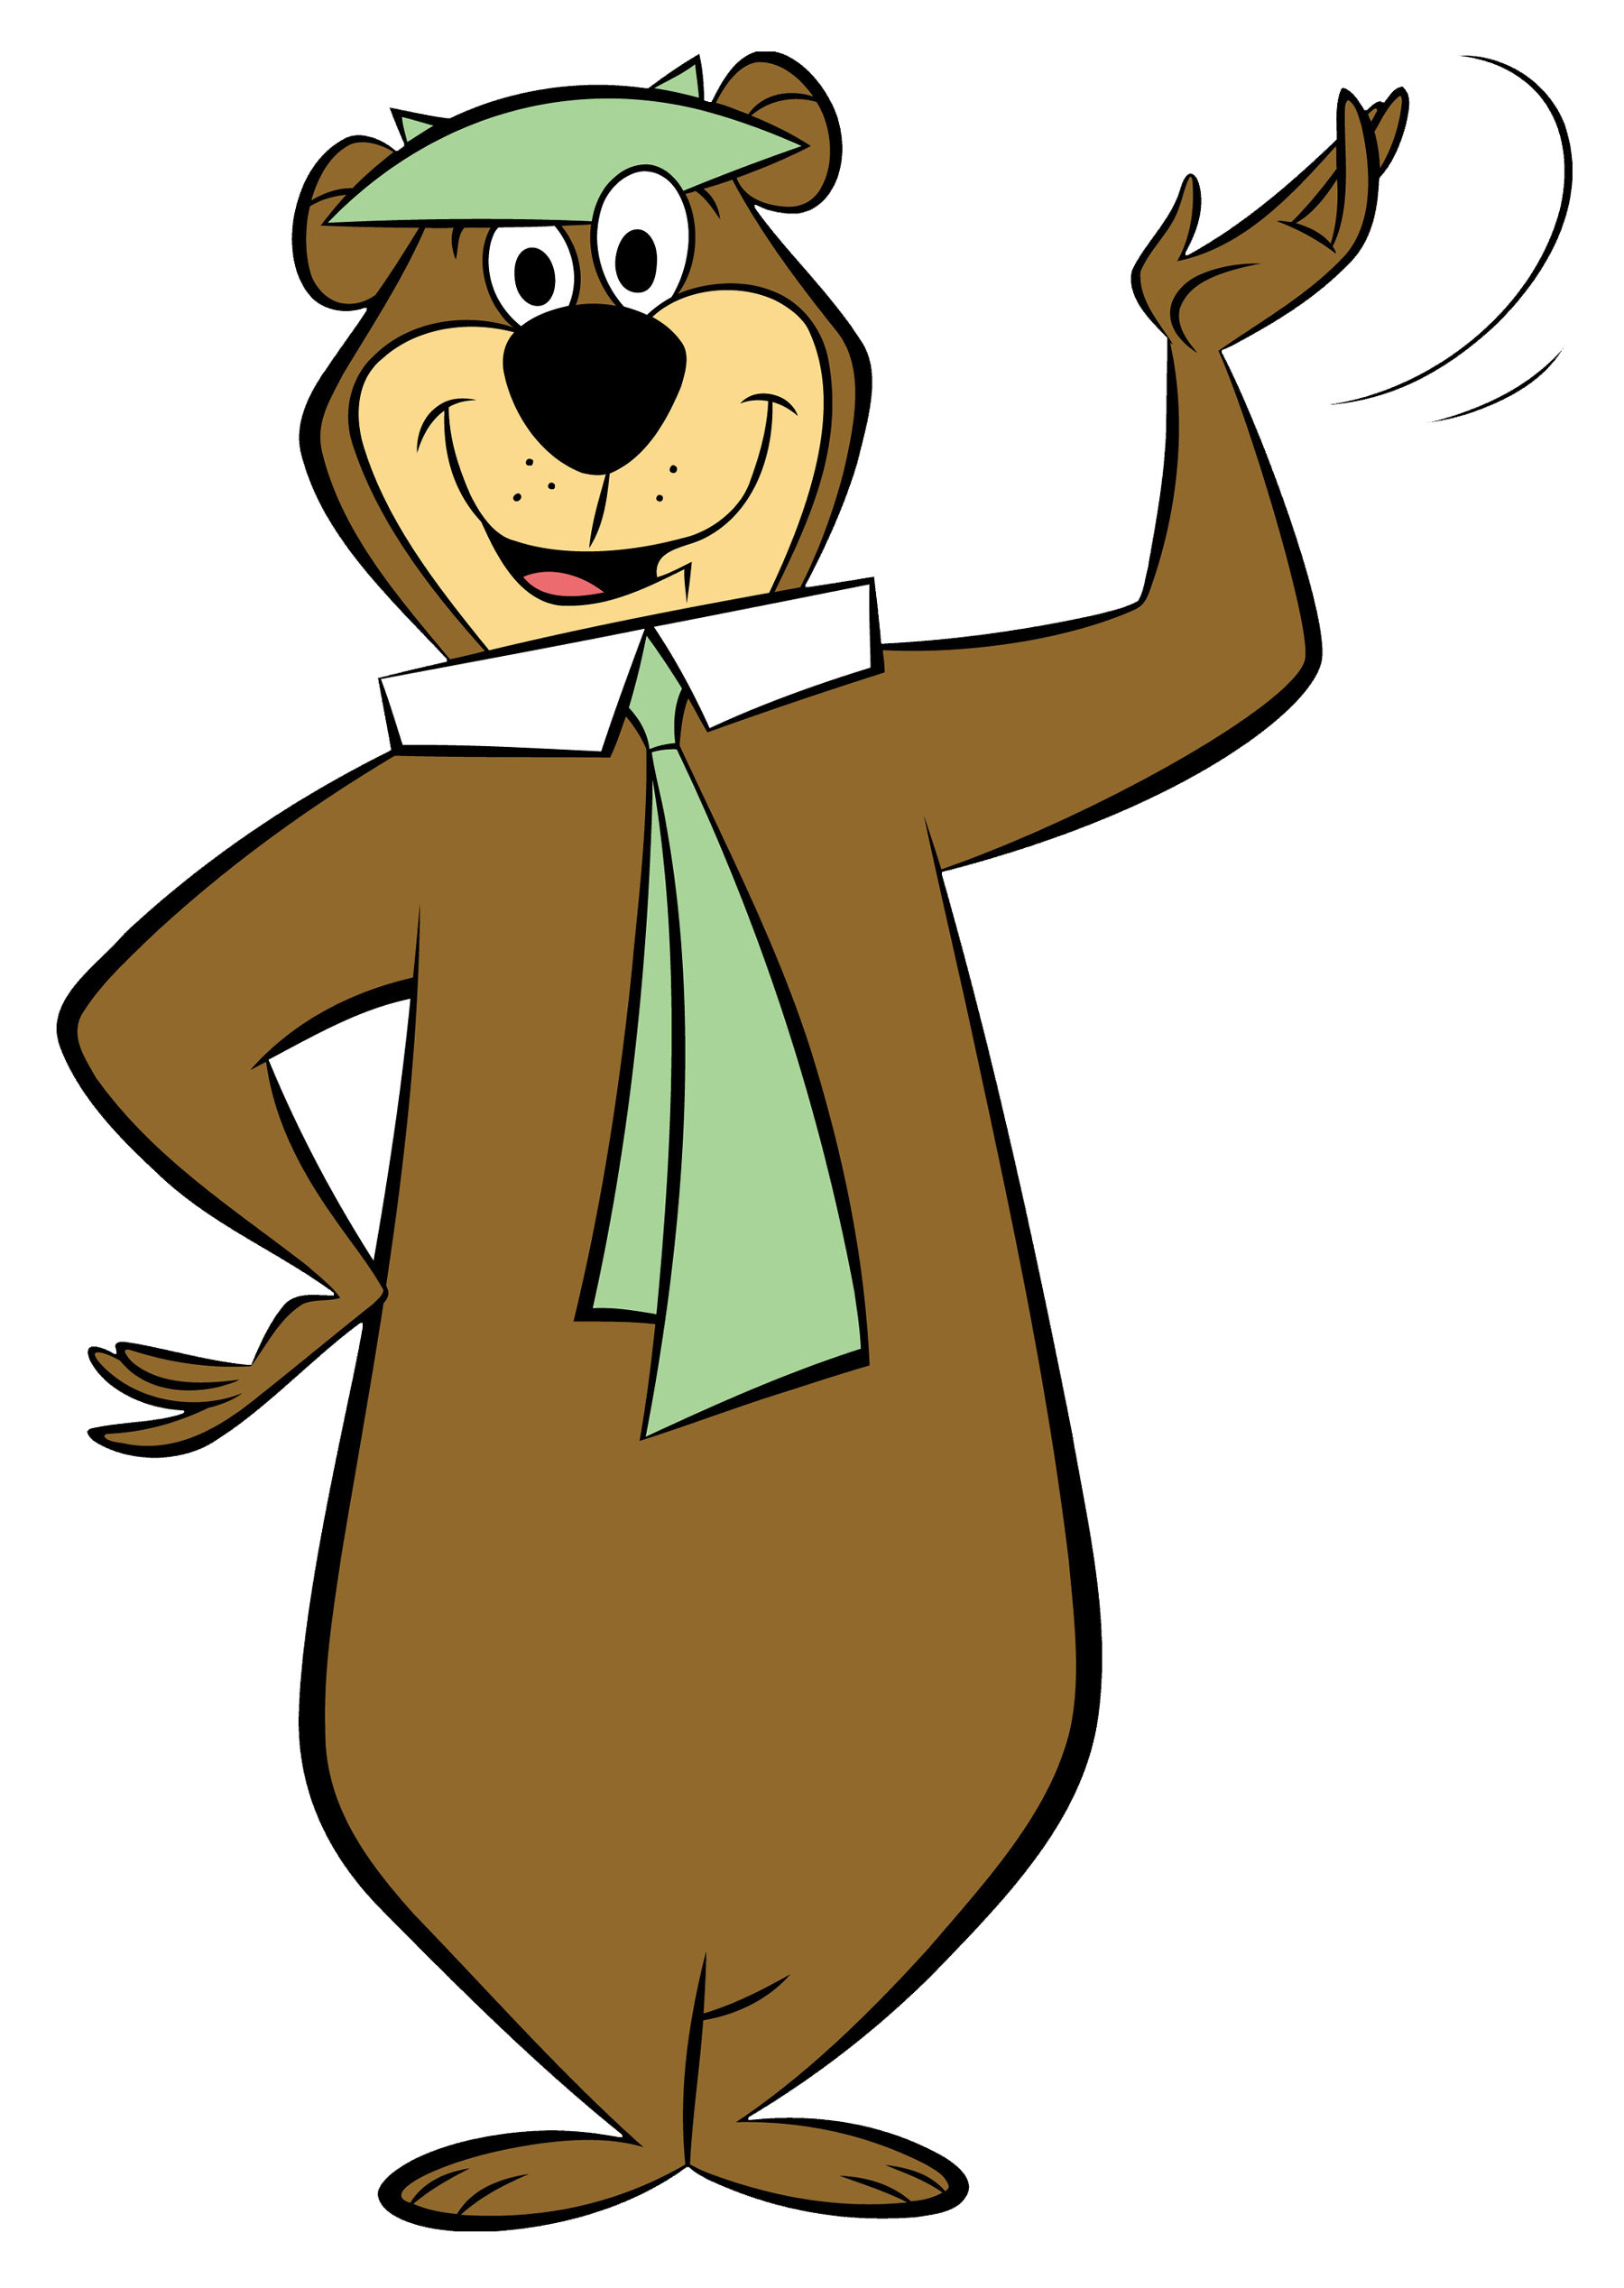 Cartoon Character in Shows ~ $1,000,000 One Million Dollars Details about   4 Bills ~ YOGI BEAR 